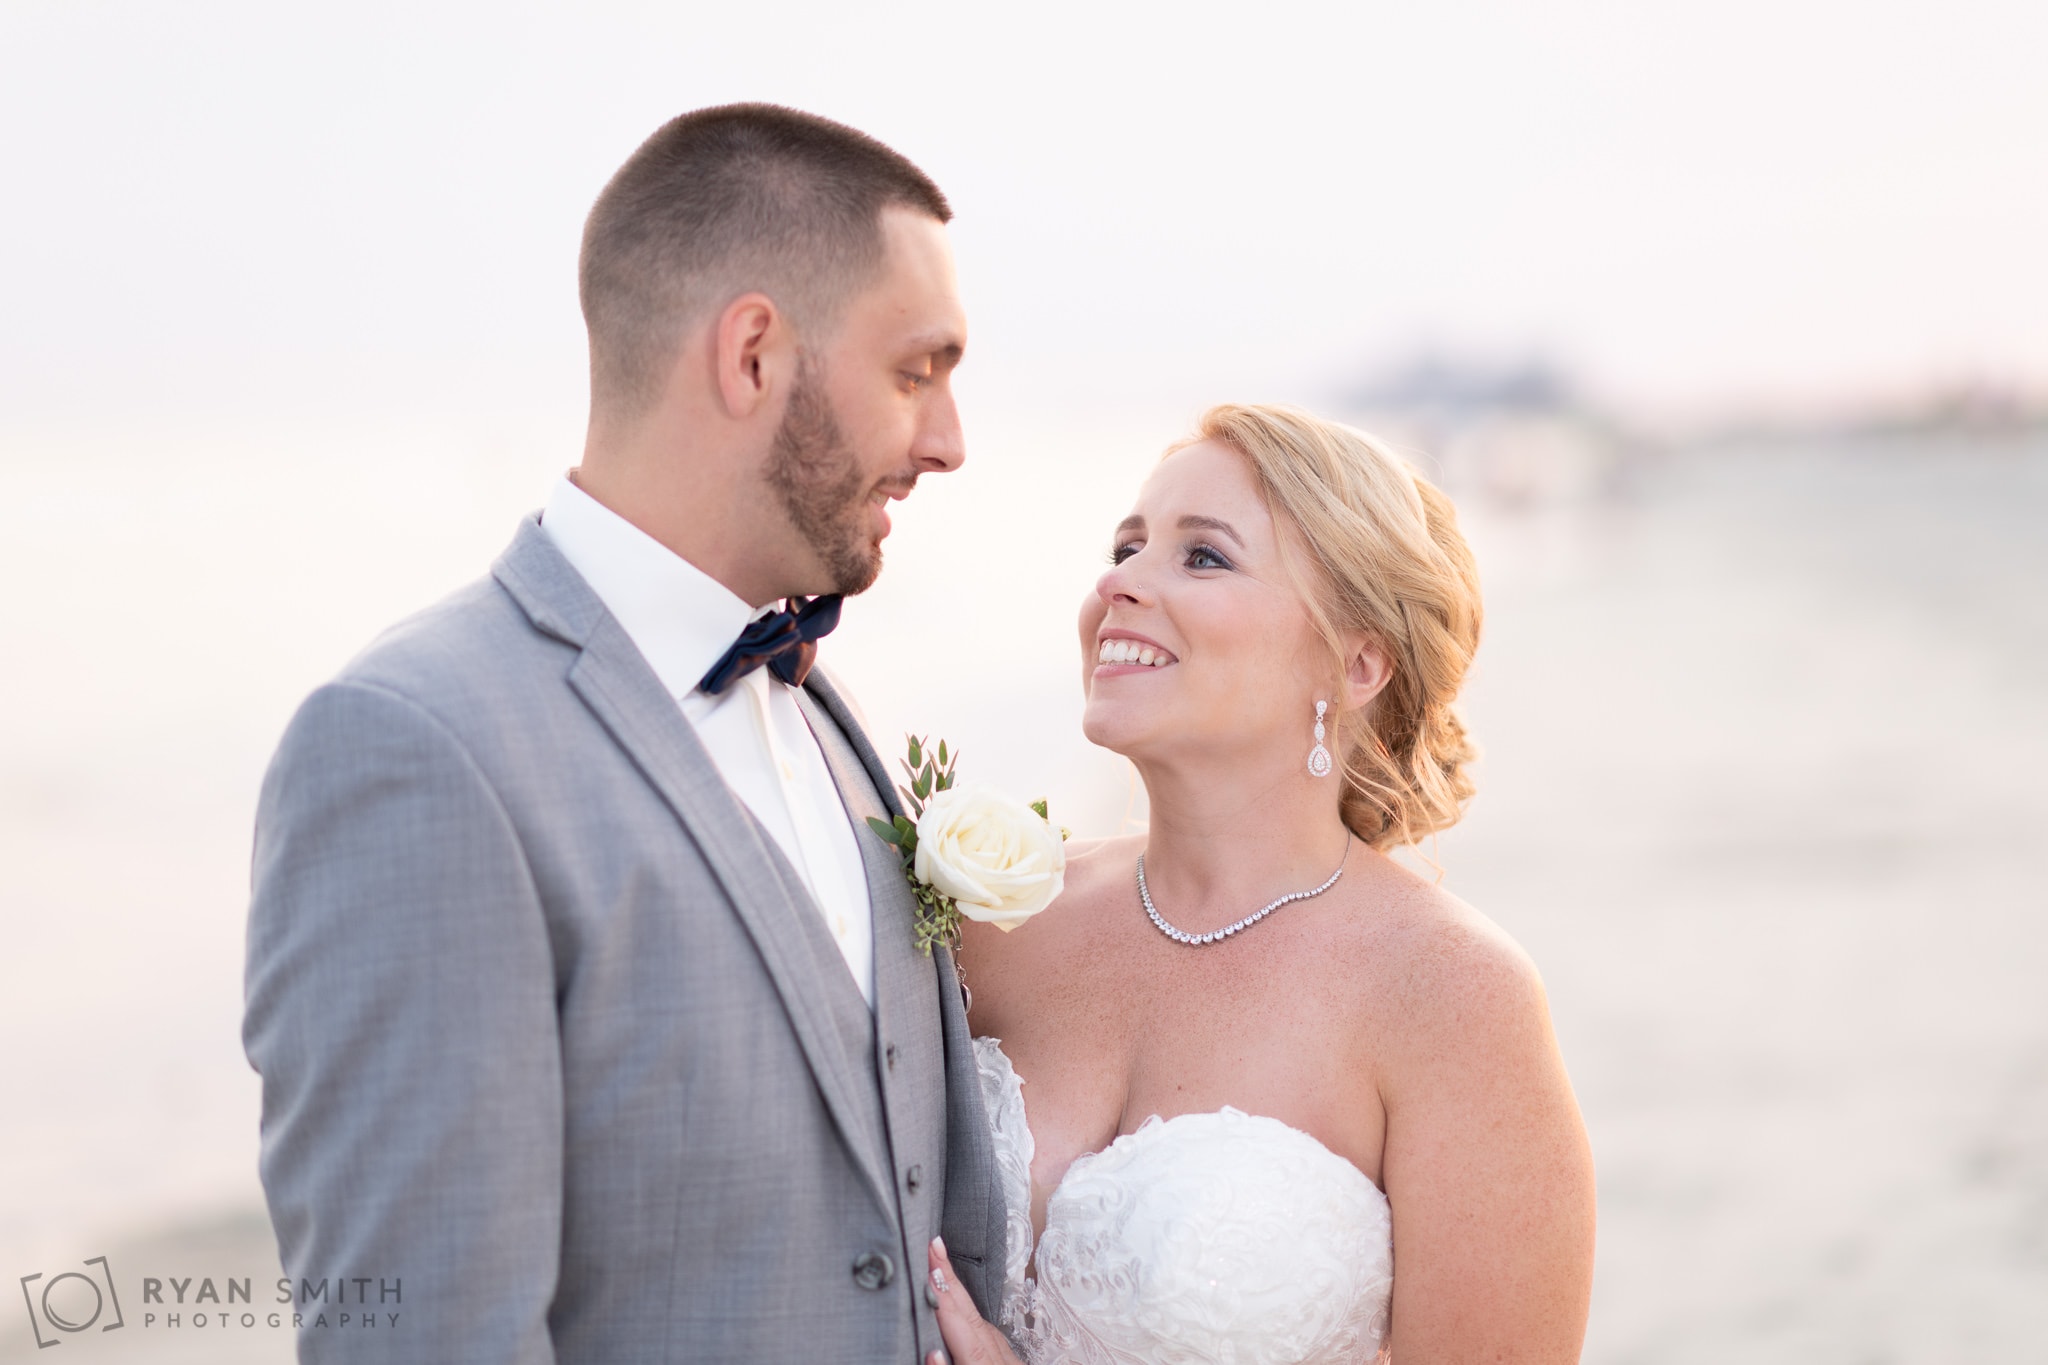 Bride smiling up at groom - 21 Main Events - North Myrtle Beach